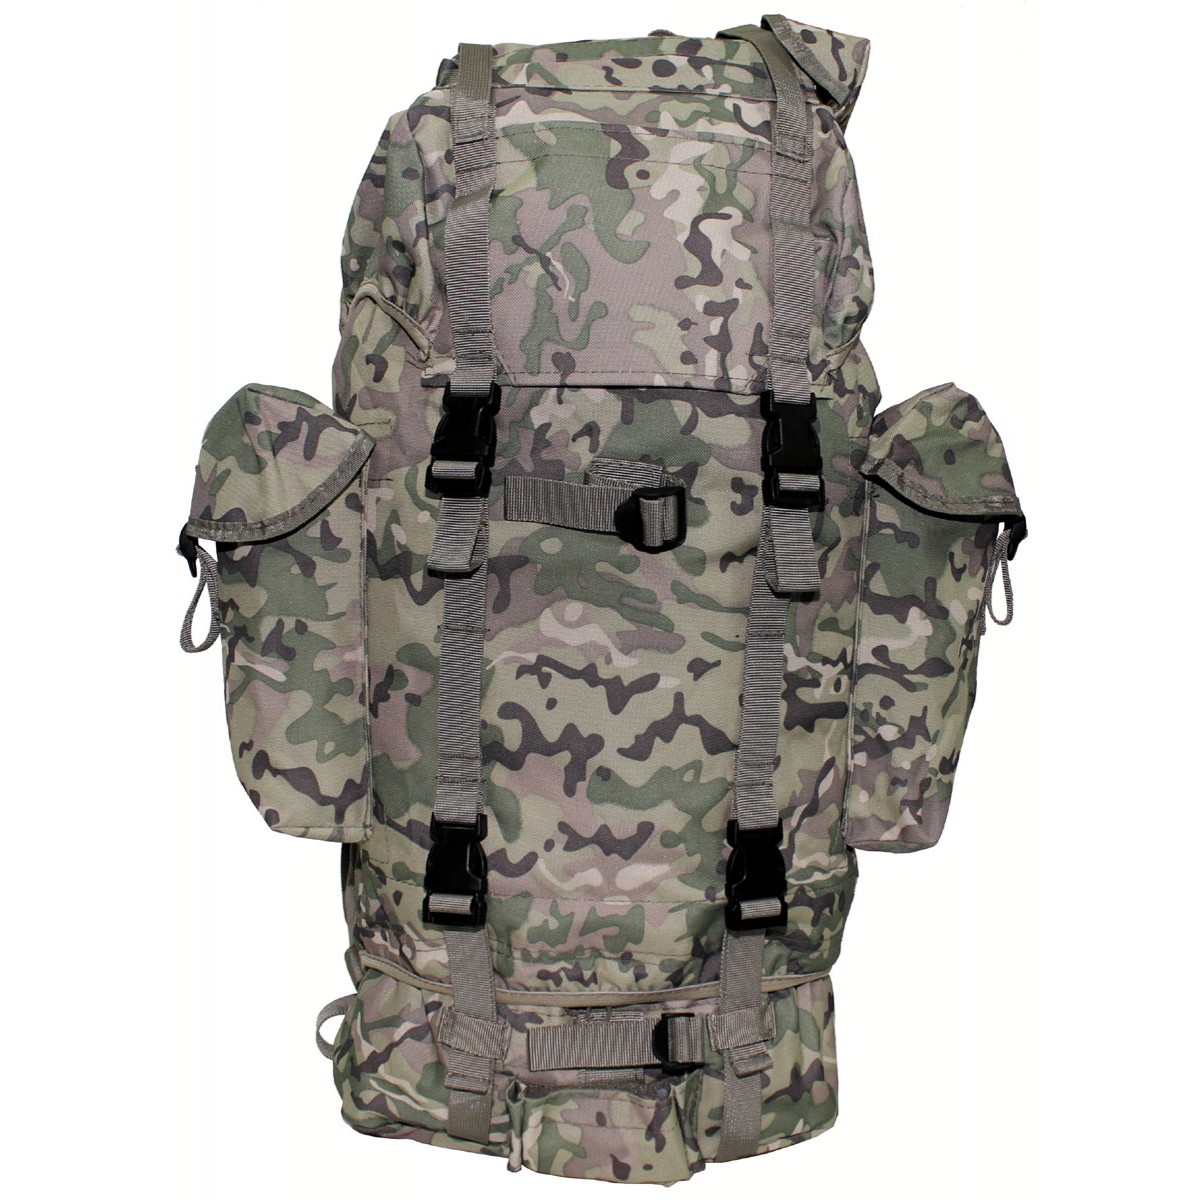 Military Patrol Expedition Backpack Large 65L - Multicam